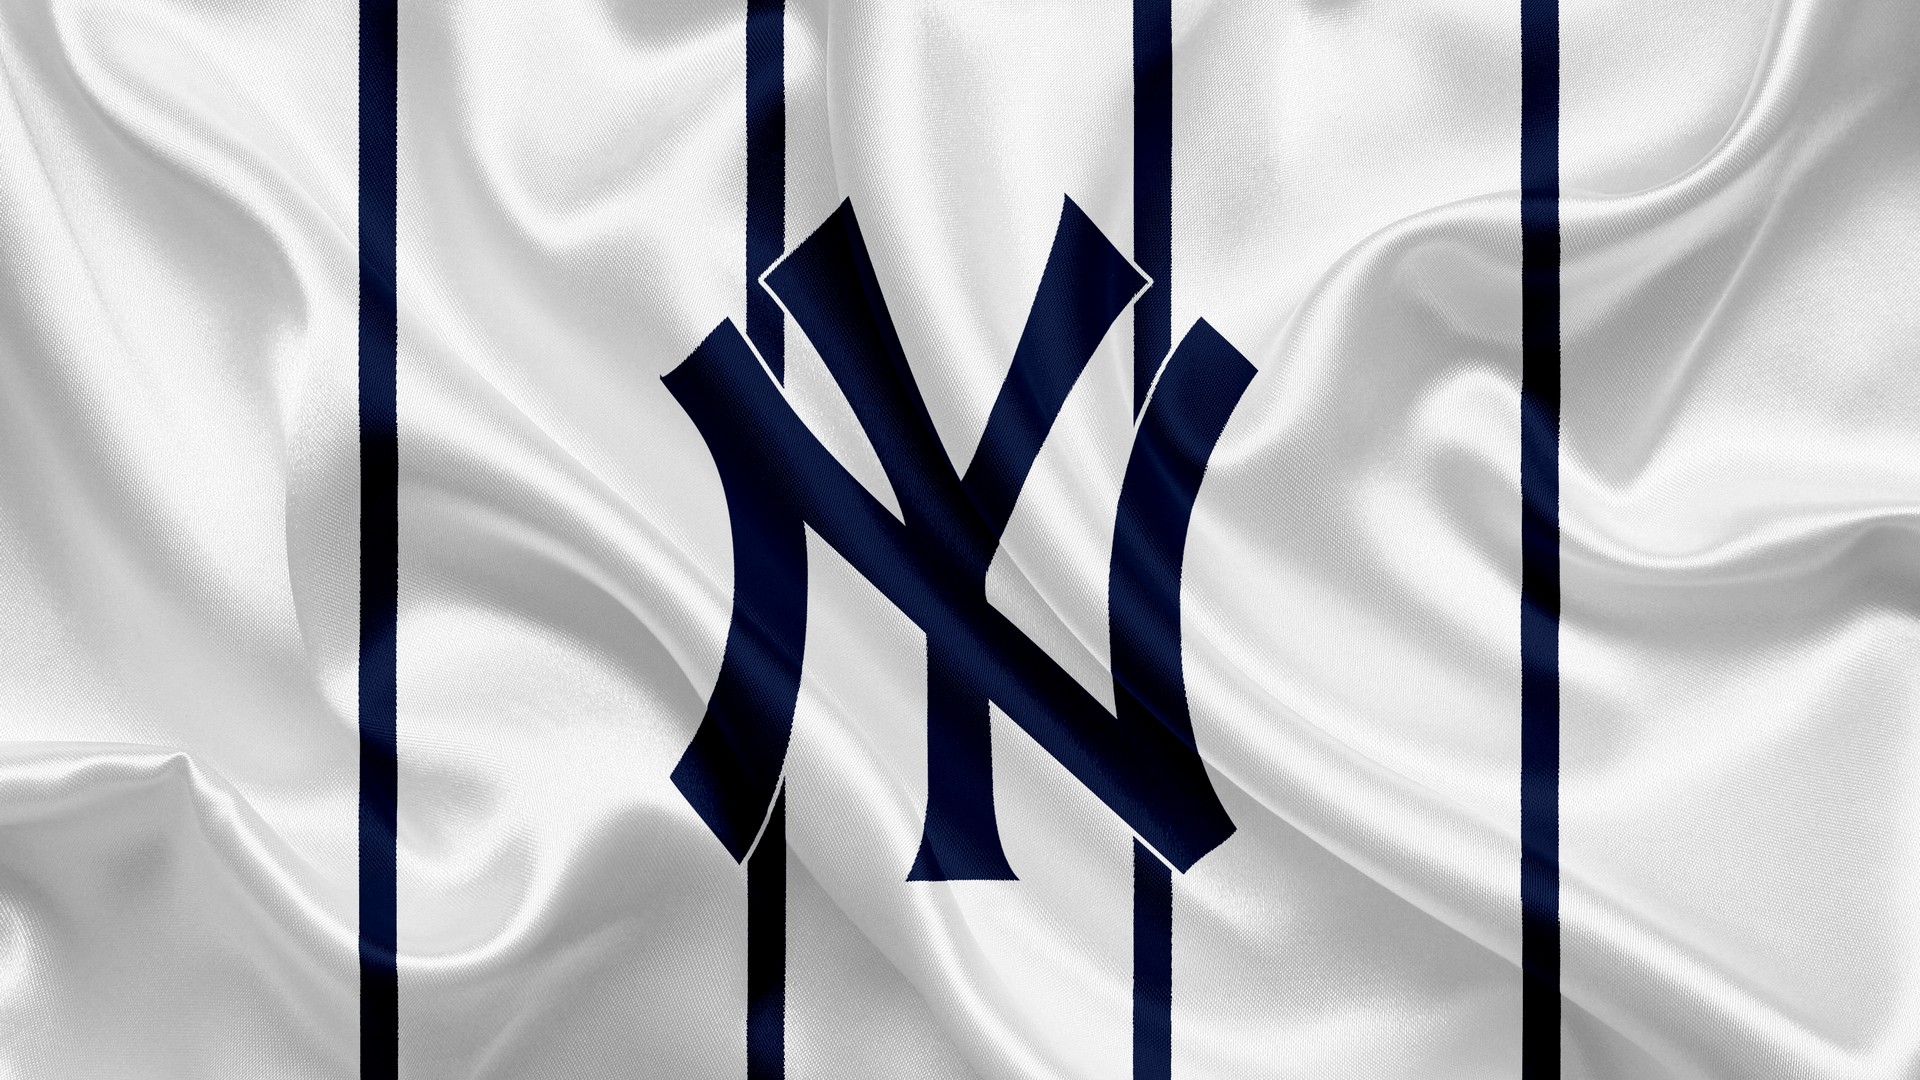 New York Yankees HD Wallpapers With high-resolution 1920X1080 pixel. You can use this wallpaper for Mac Desktop Wallpaper, Laptop Screensavers, Android Wallpapers, Tablet or iPhone Home Screen and another mobile phone device